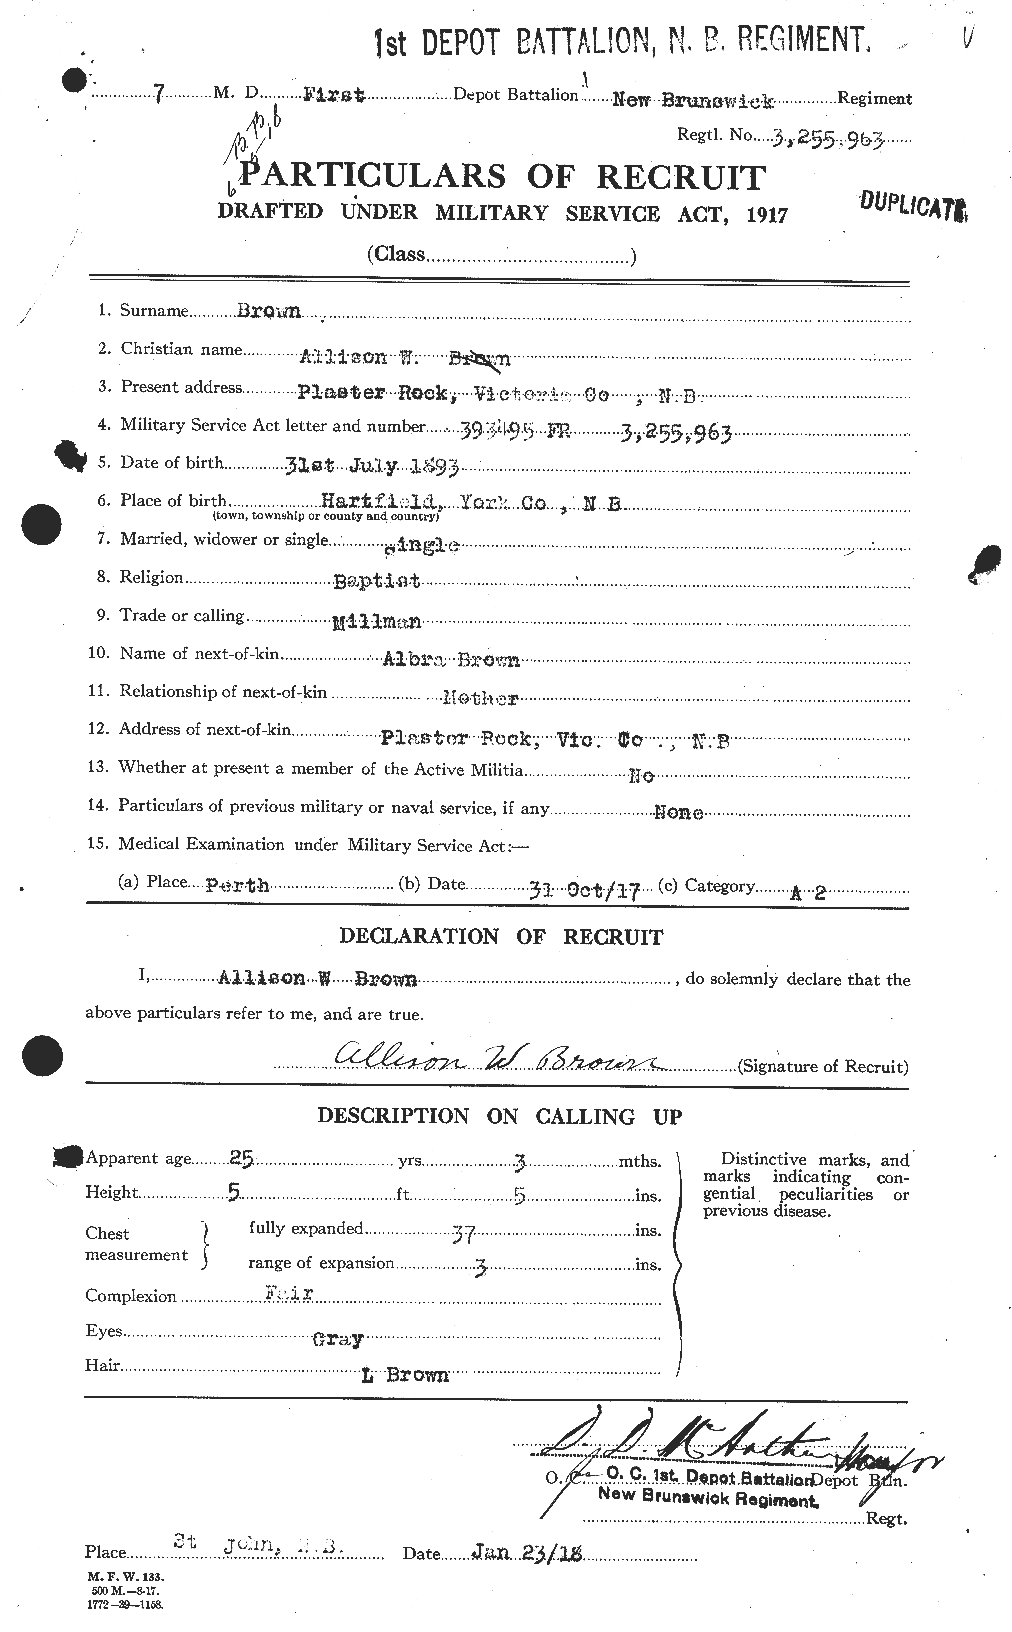 Personnel Records of the First World War - CEF 263690a